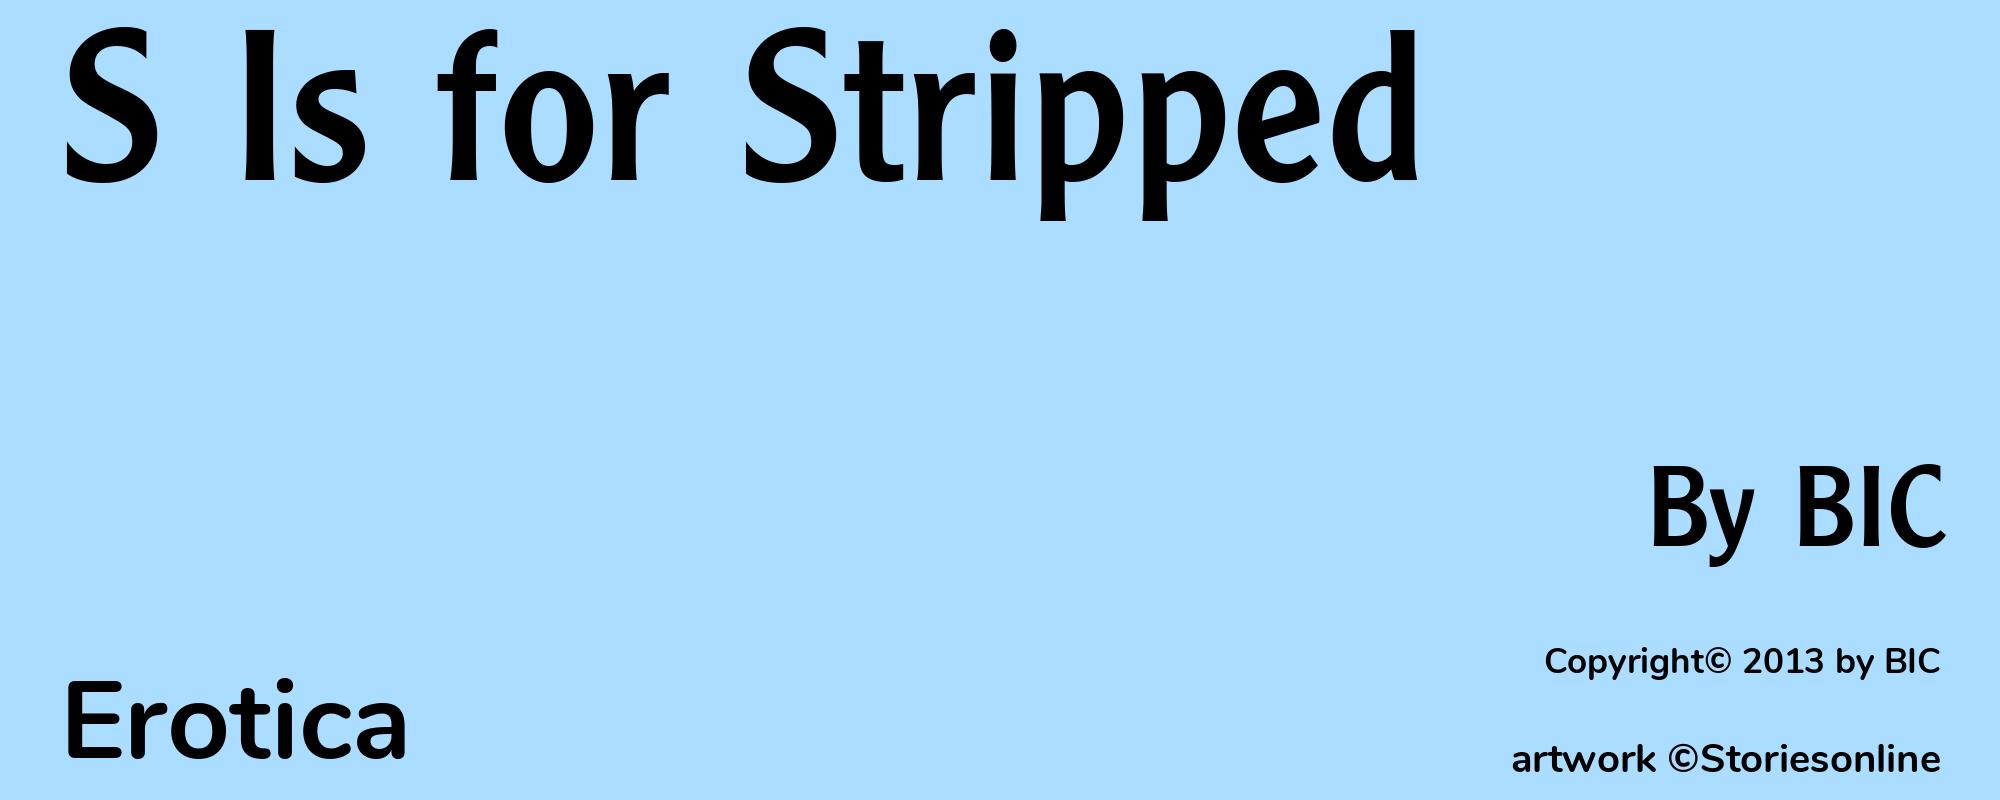 S Is for Stripped - Cover